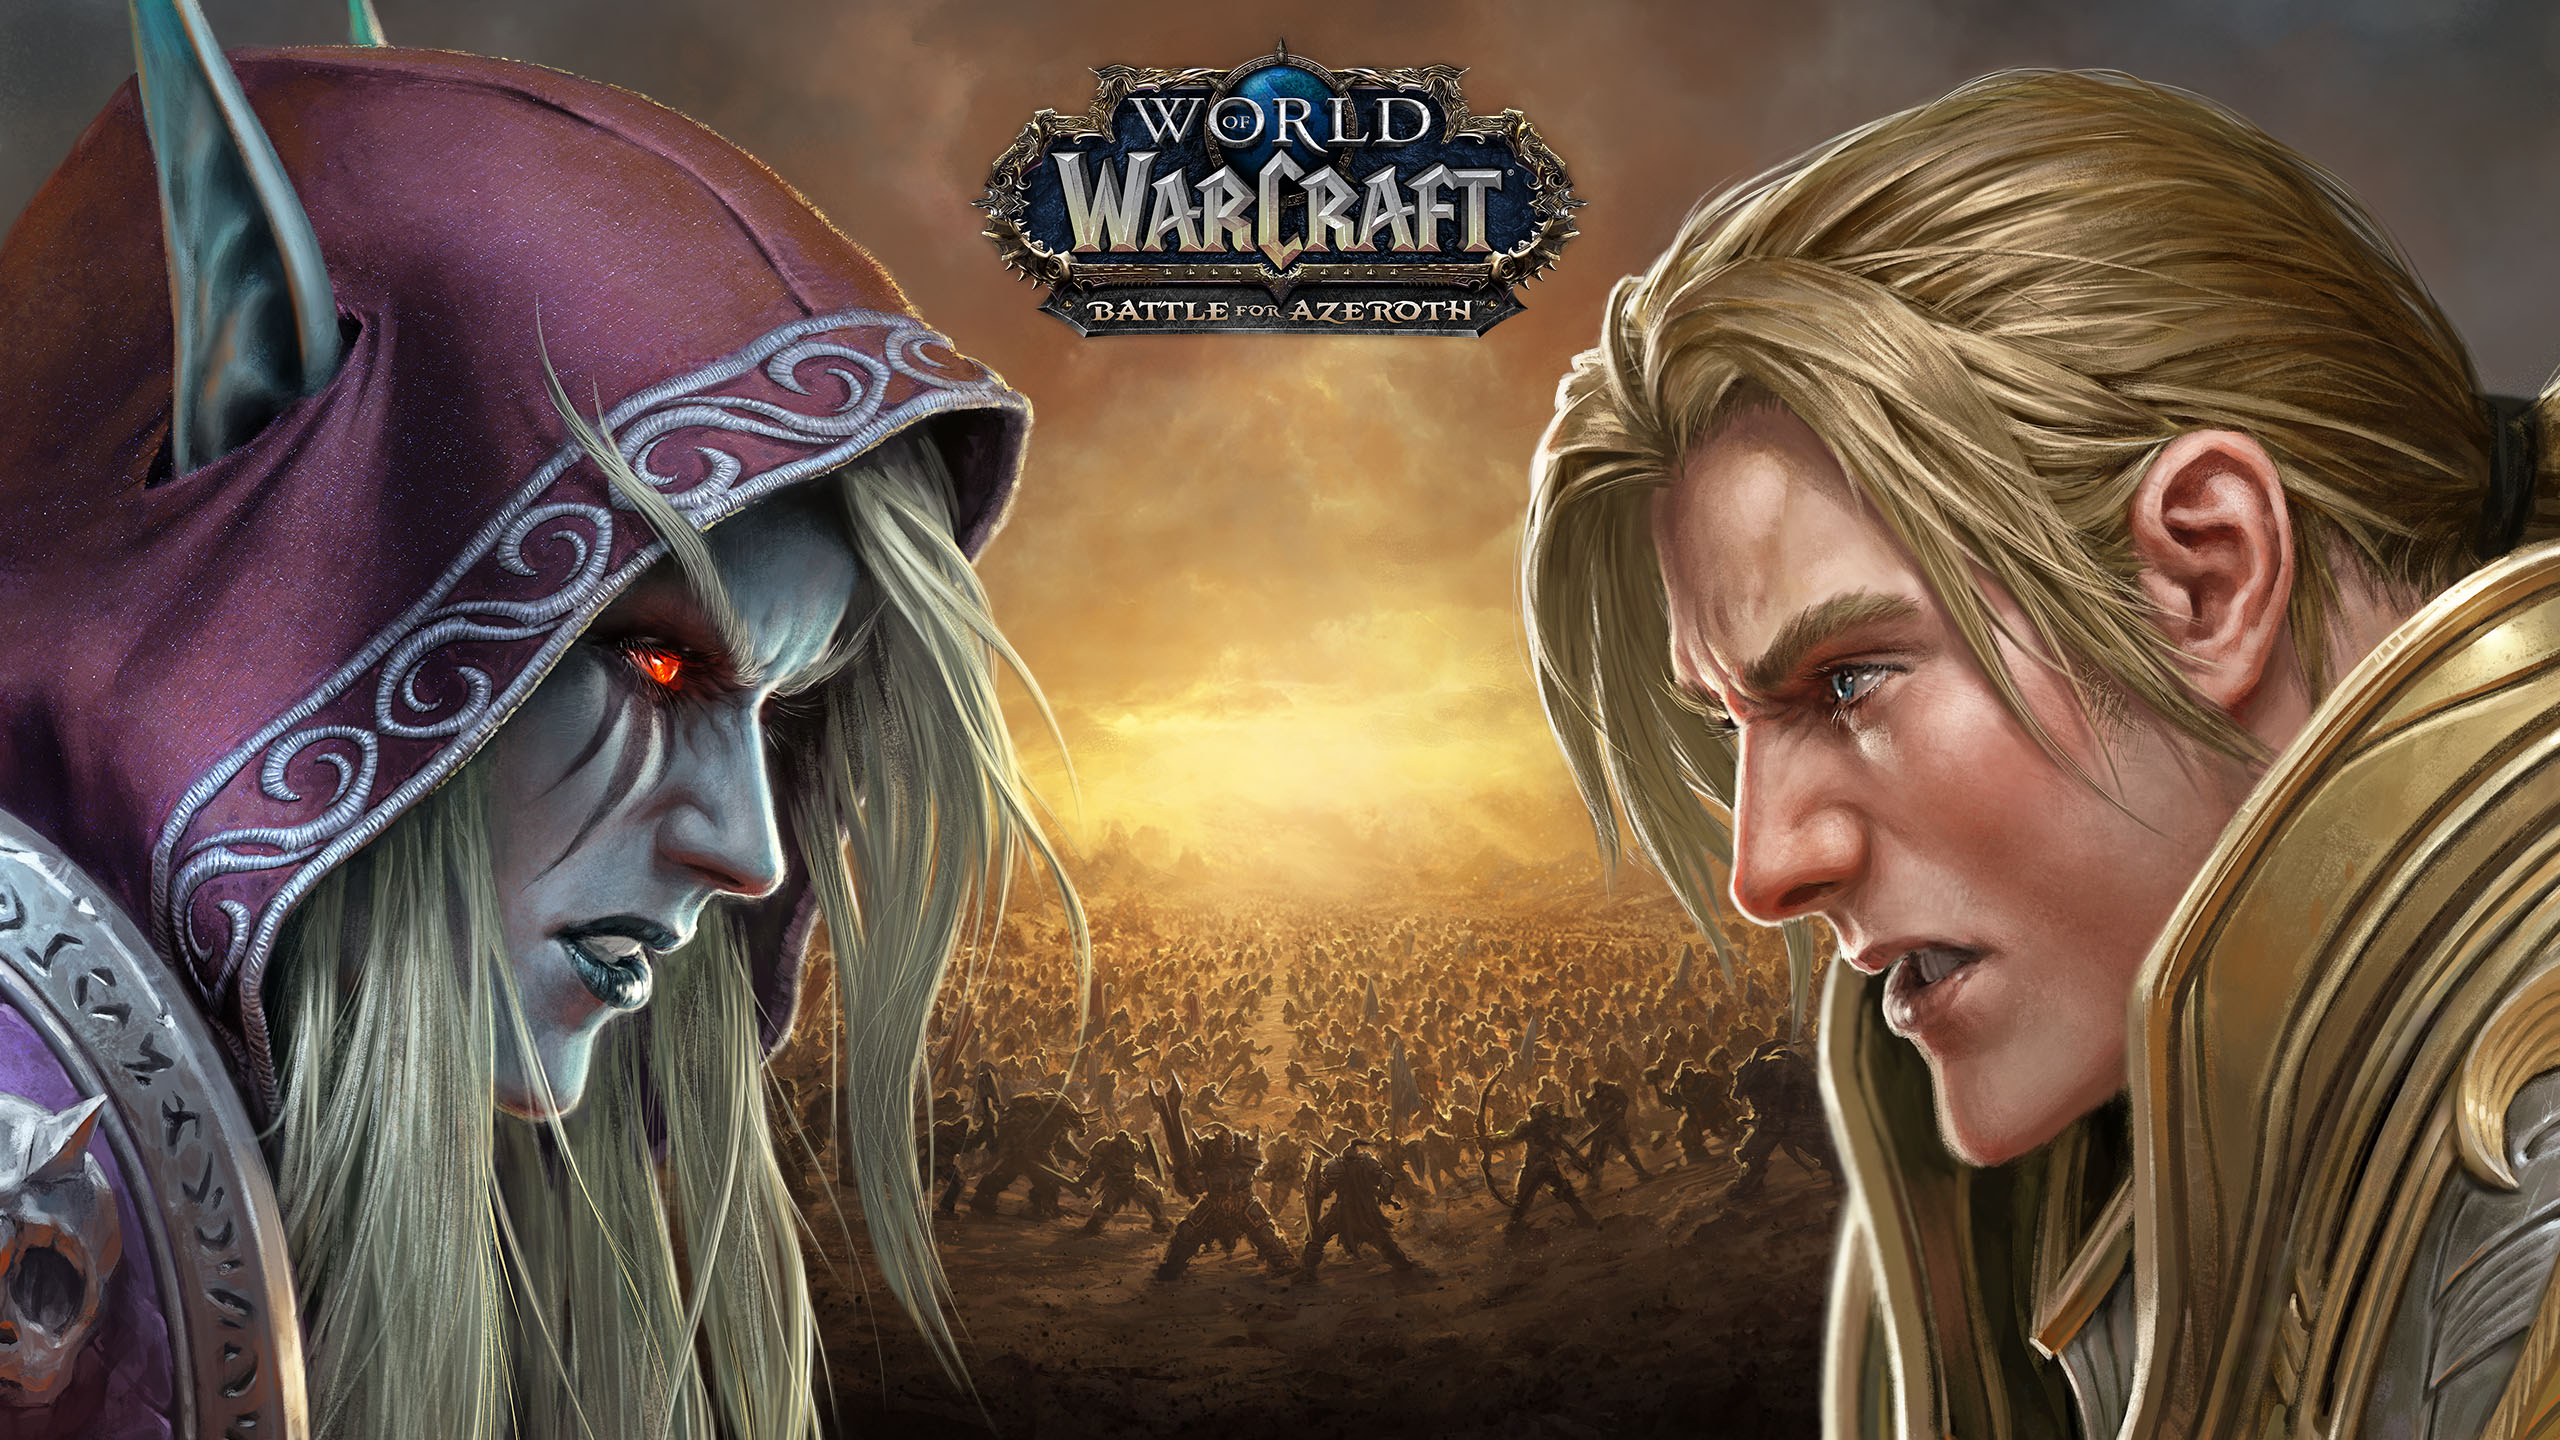 Video Game World Of Warcraft Battle For Azeroth 2560x1440